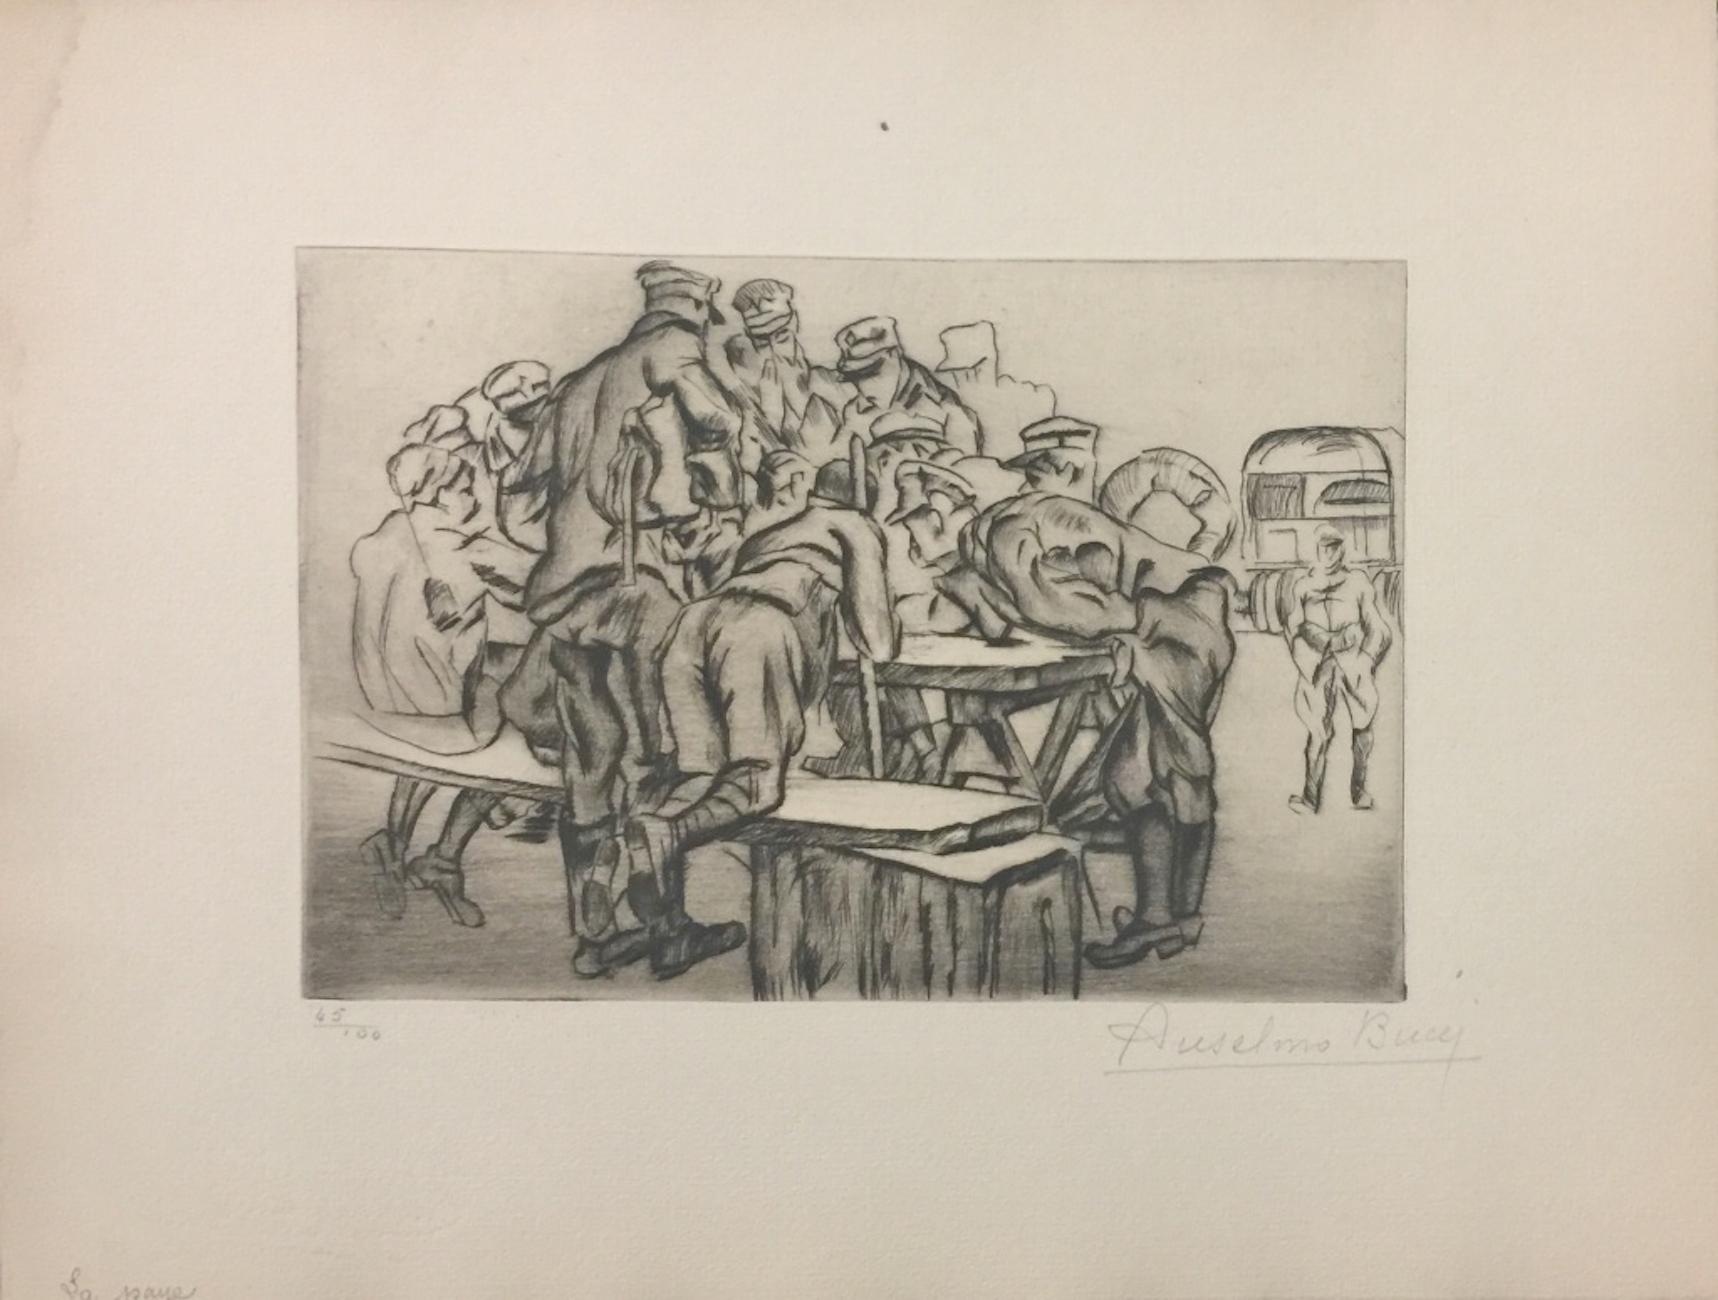 Image dimensions: 15.5 x 23 cm.

Hand signed. Edition of 100 prints on Hollande paper. From the collection: “Croquis du Front Italien”, published in Paris by D'Alignan editions. Anselmo Bucci was an Italian painter and printmaker.

He took part in